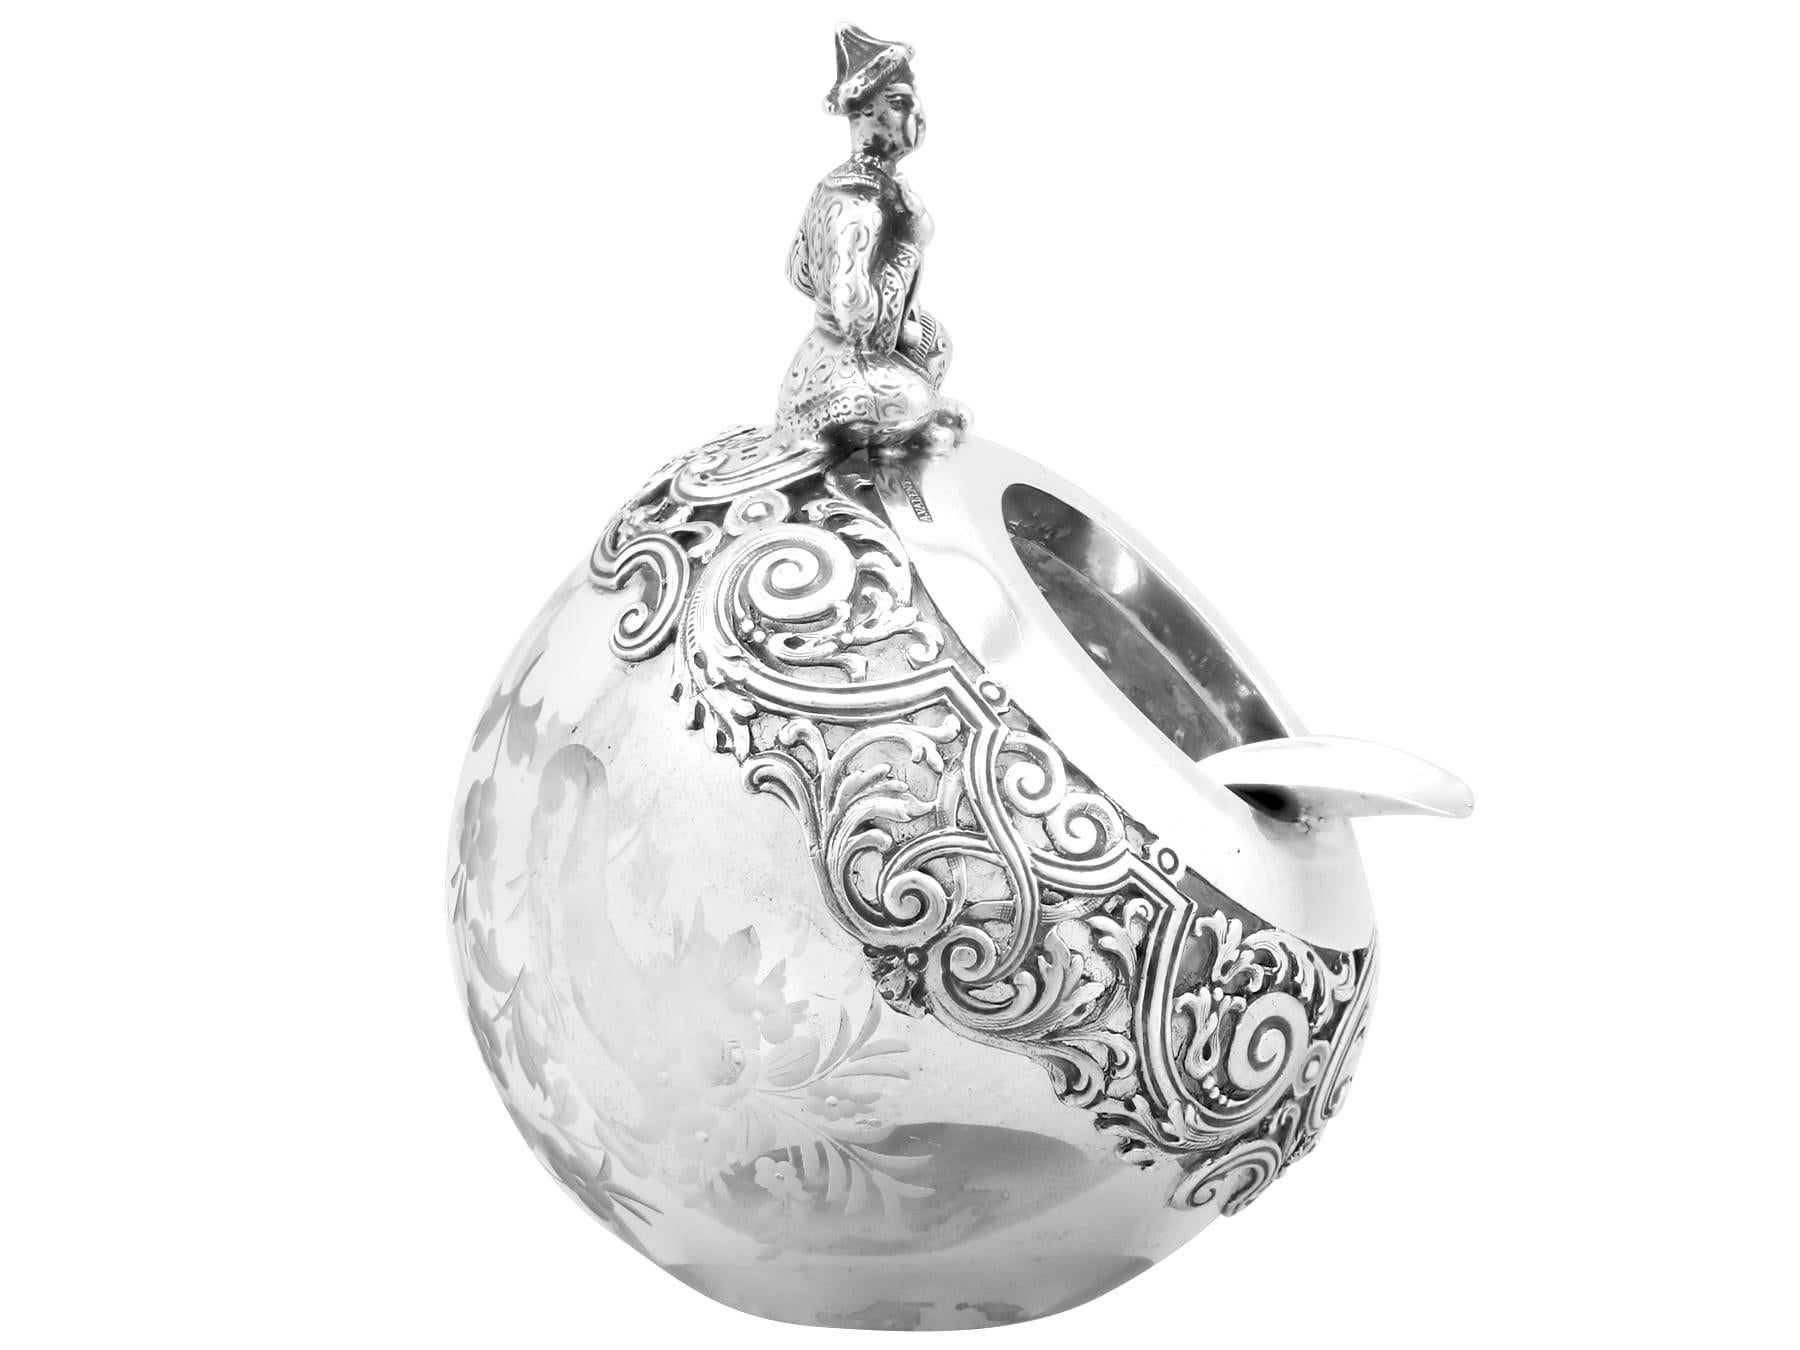 An exceptional, fine and impressive antique Spanish 916 standard silver and glass ashtray an addition to our ornamental collection.

This exceptional antique glass ashtray has a globular form.

The surface of the glass body is embellished with